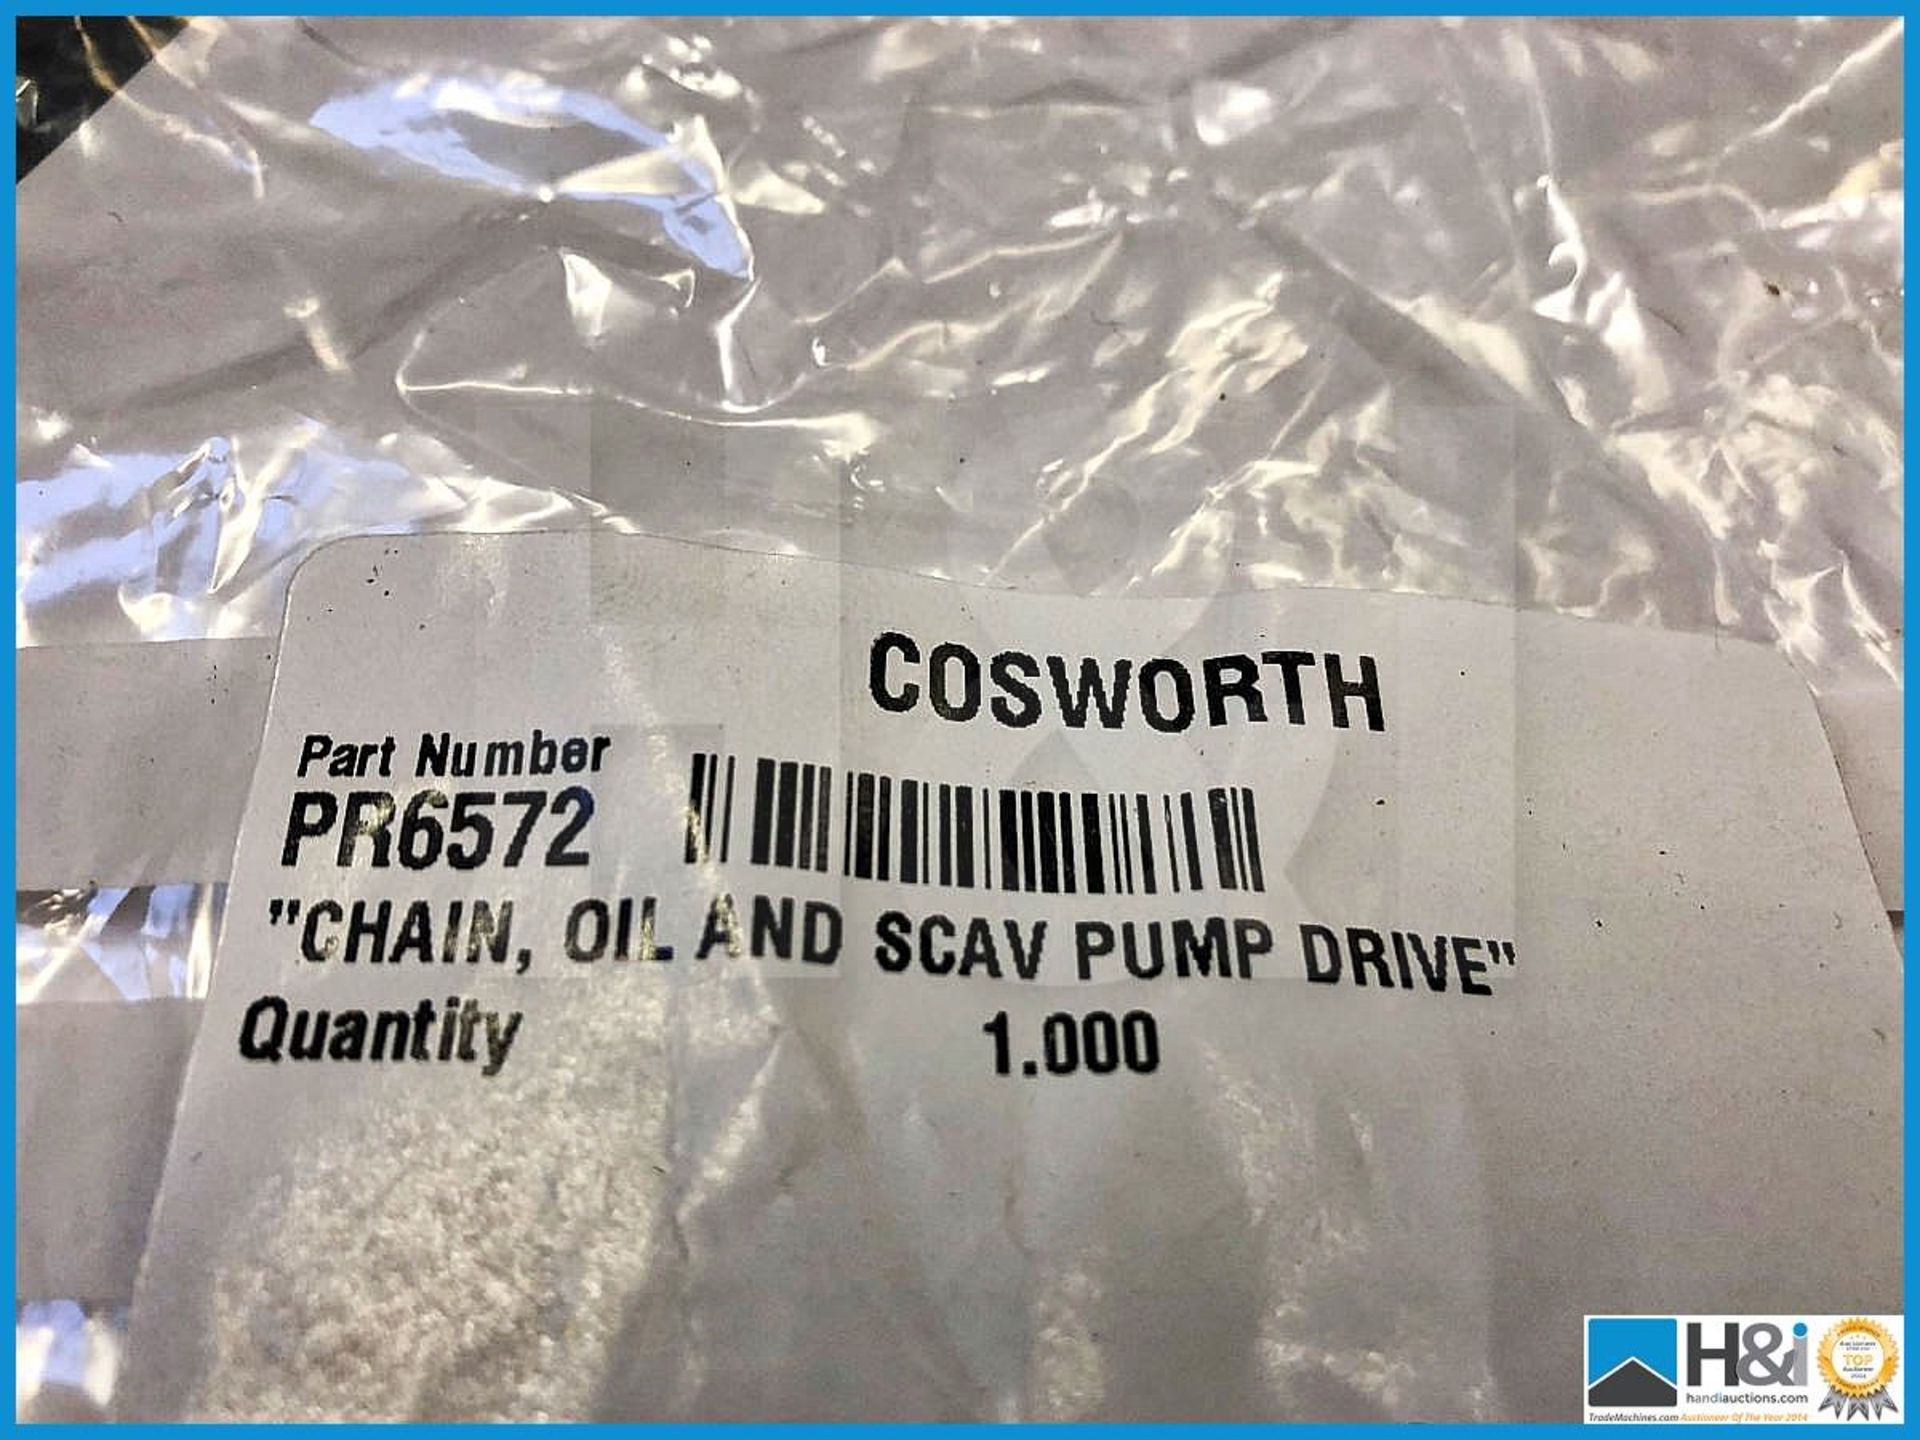 47 x Cosworth Chain, Oil and Scav Pump Drive. Code PR6572. Lot 150. RRP GBP 7332 - Image 3 of 3